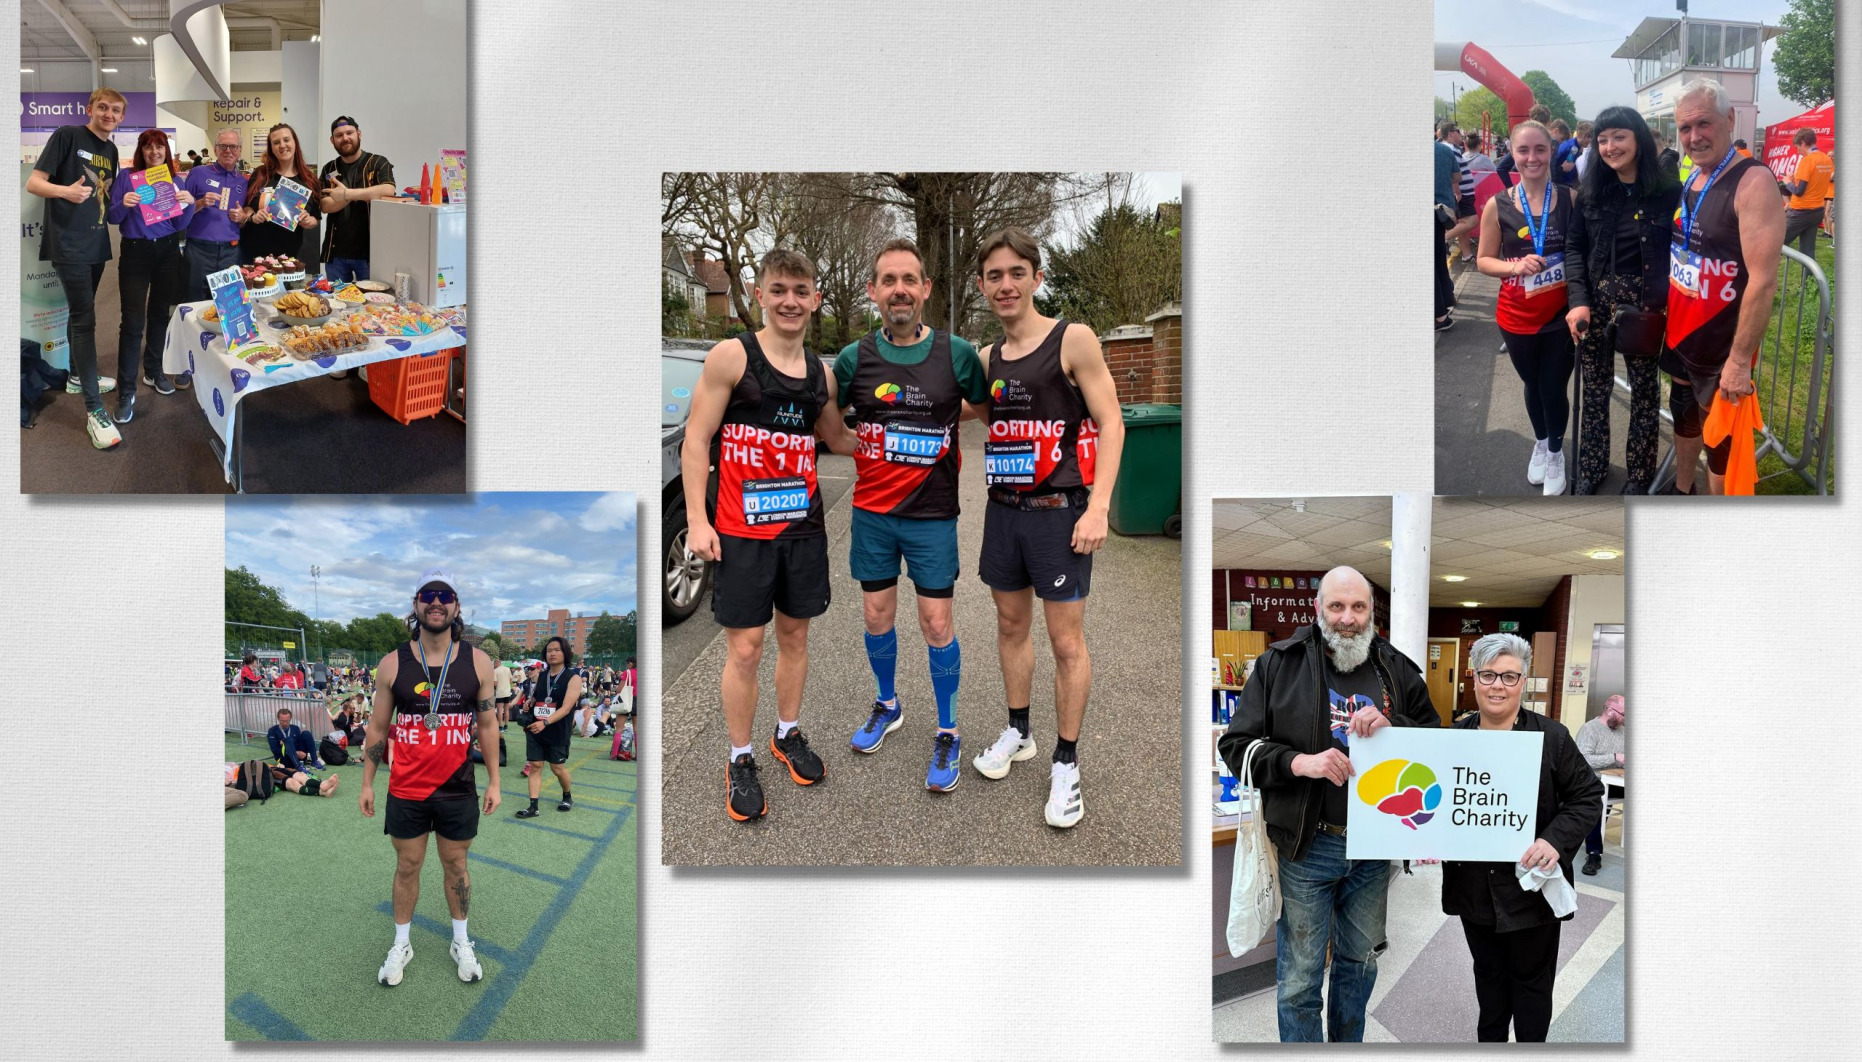 Some of the varied types of fundraisers for The Brain Charity, showing runners, bikers and people wearing nineties gear at work